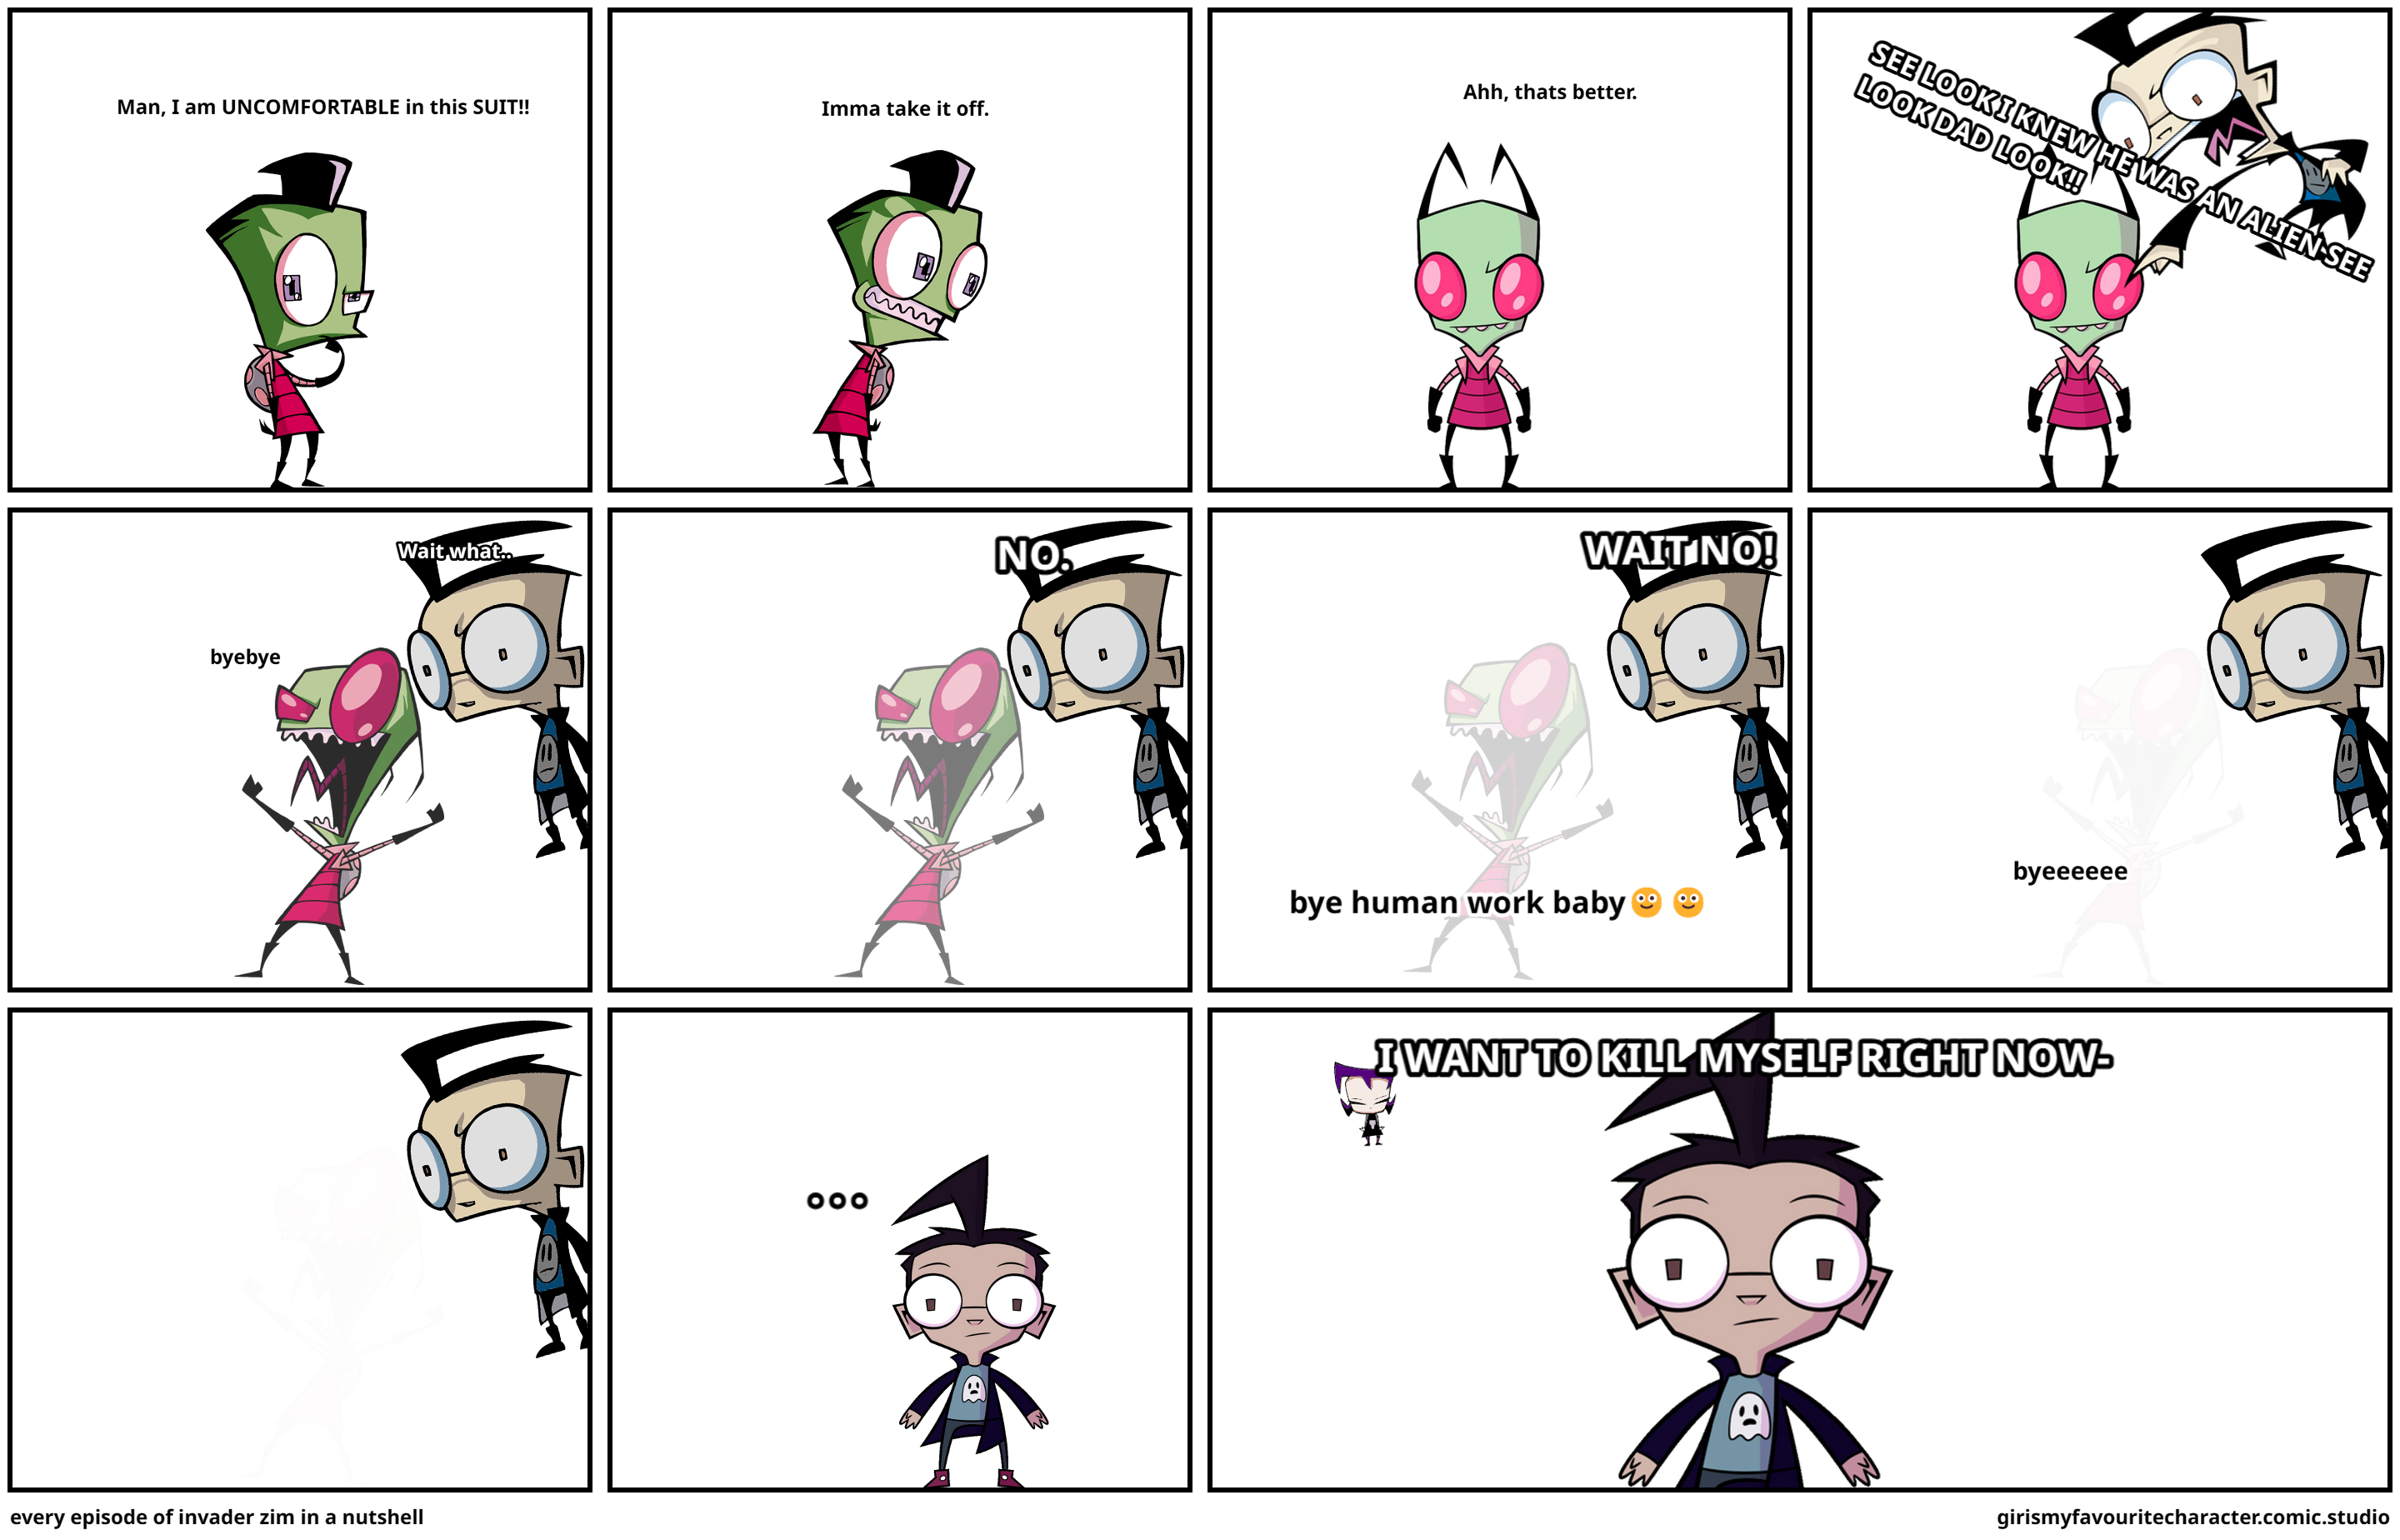 every episode of invader zim in a nutshell